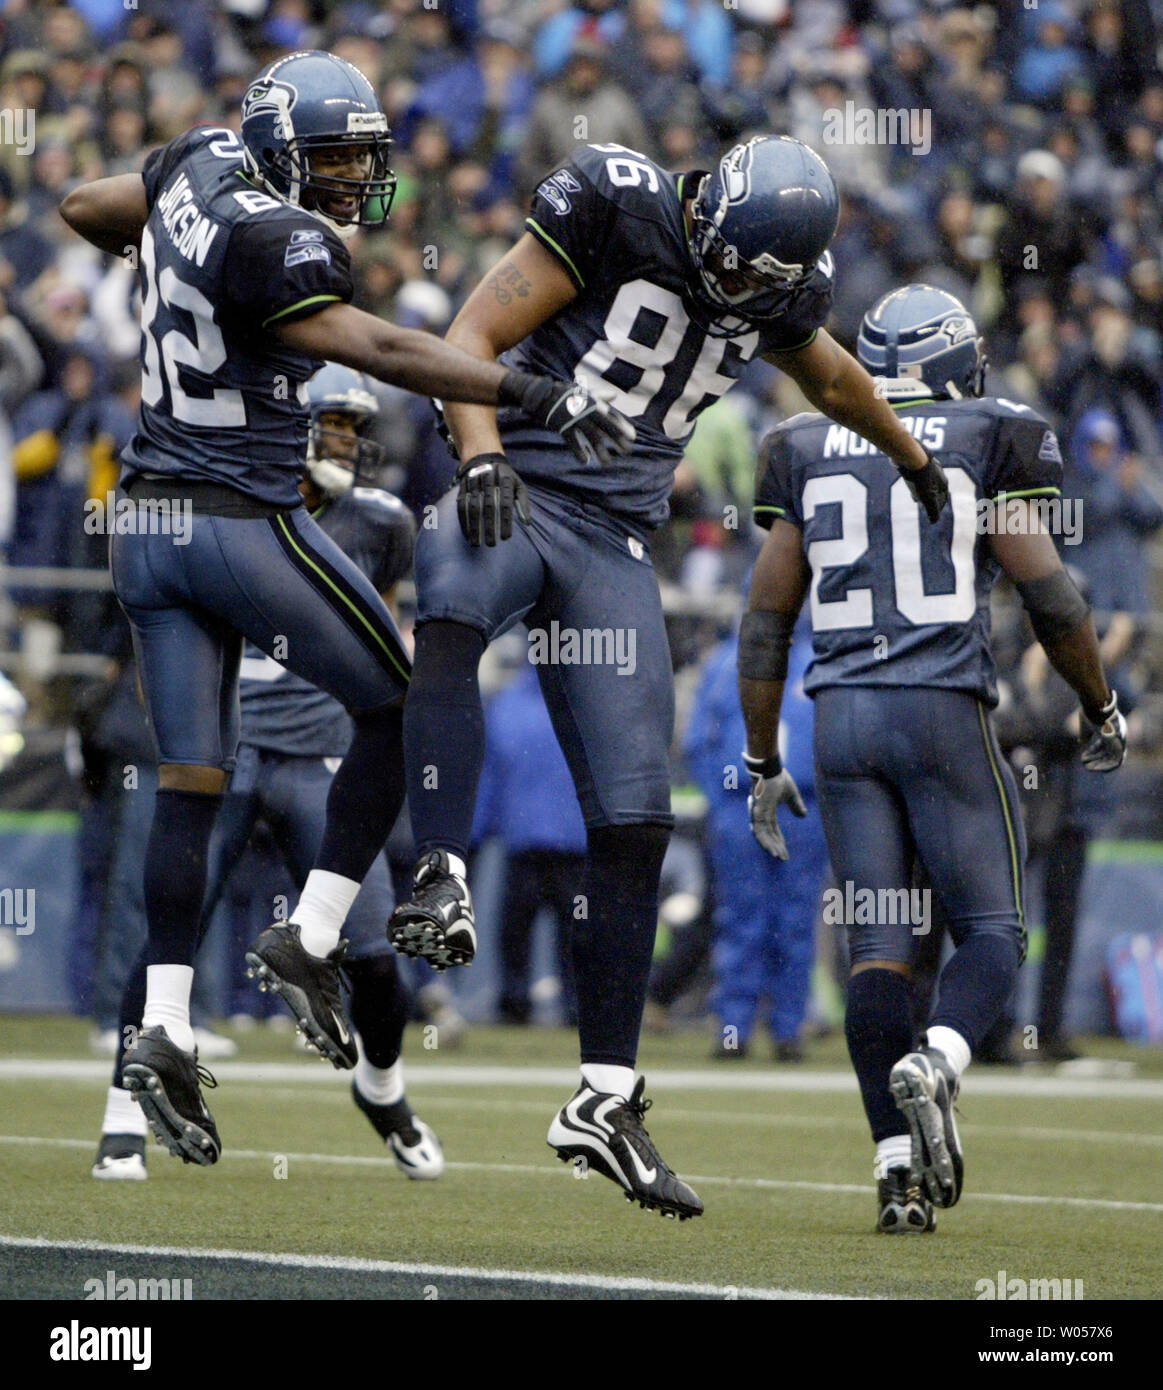 Seattle Seahawks wide receiver Darrell Jackson (L) and tight end Jerramy Stevens celebrates Jackson's touchdown againts the St. Louis Rams, in the first quarter at Qwest Field in Seattle on November 12, 2006.  (UPI Photo/Jim Bryant) Stock Photo